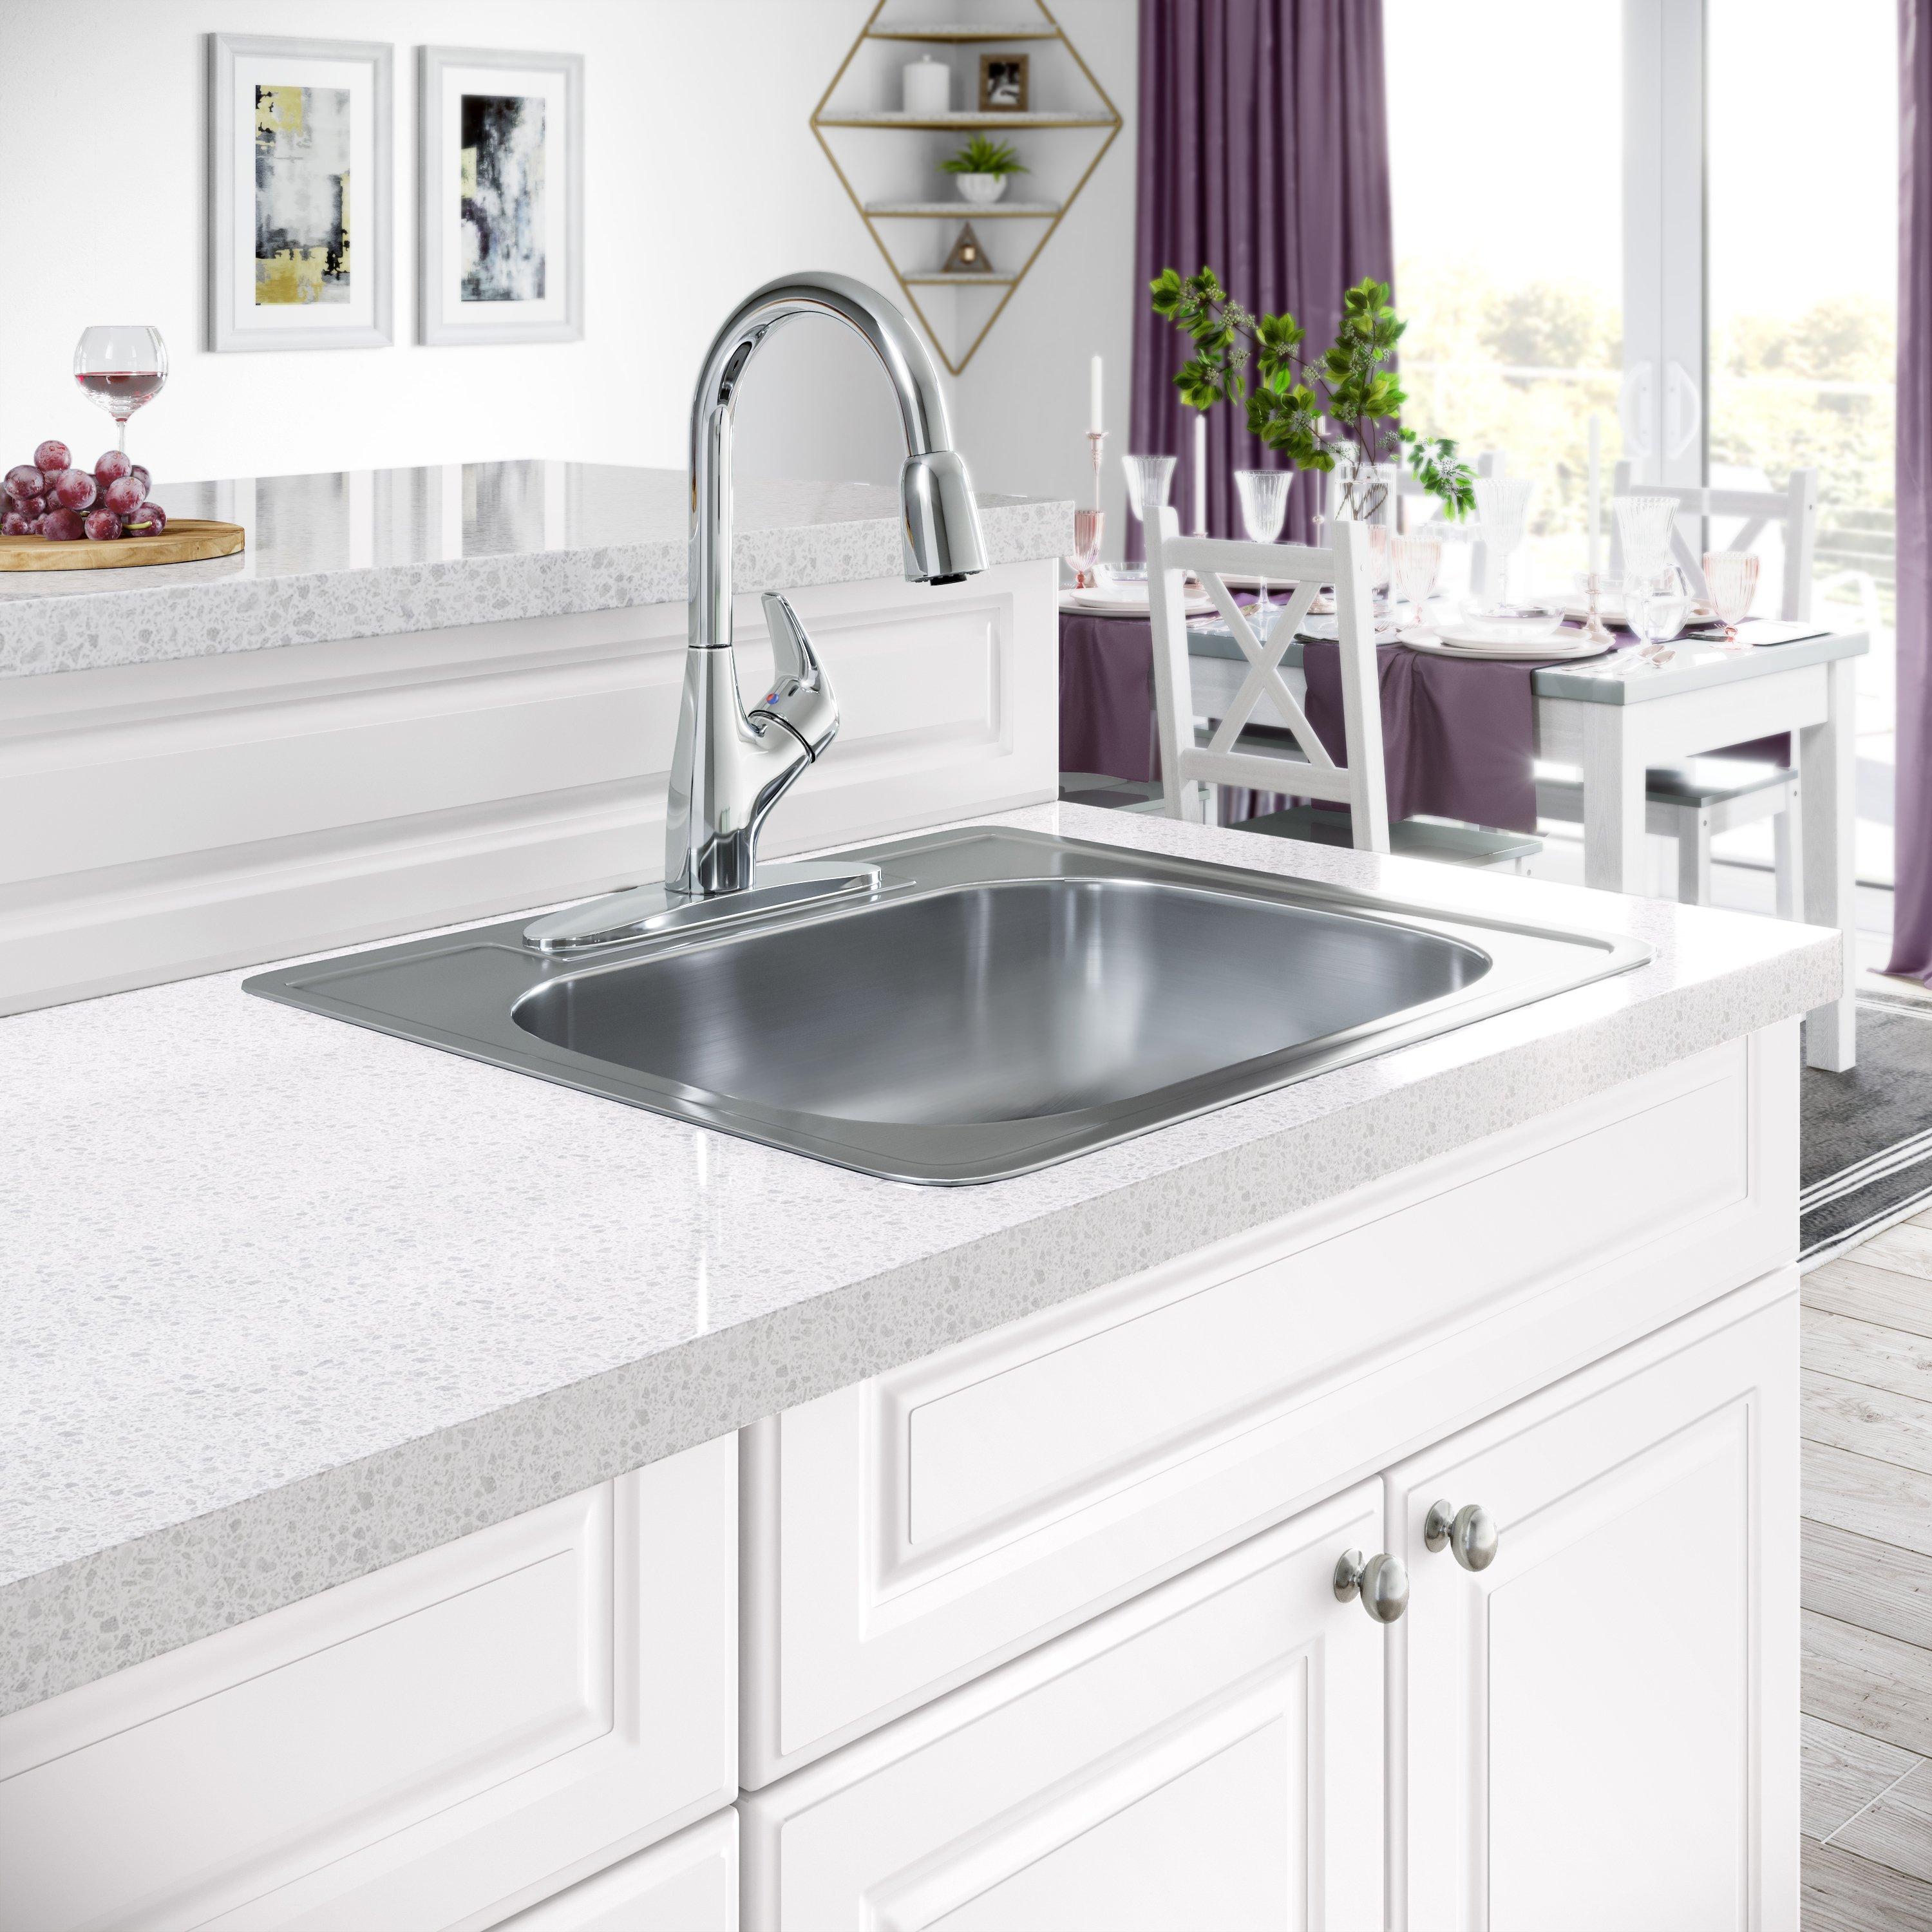 A stainless steel, single-handle pull-down kitchen faucet and sink are in focus in a white kitchen with an island and dining table in the background.